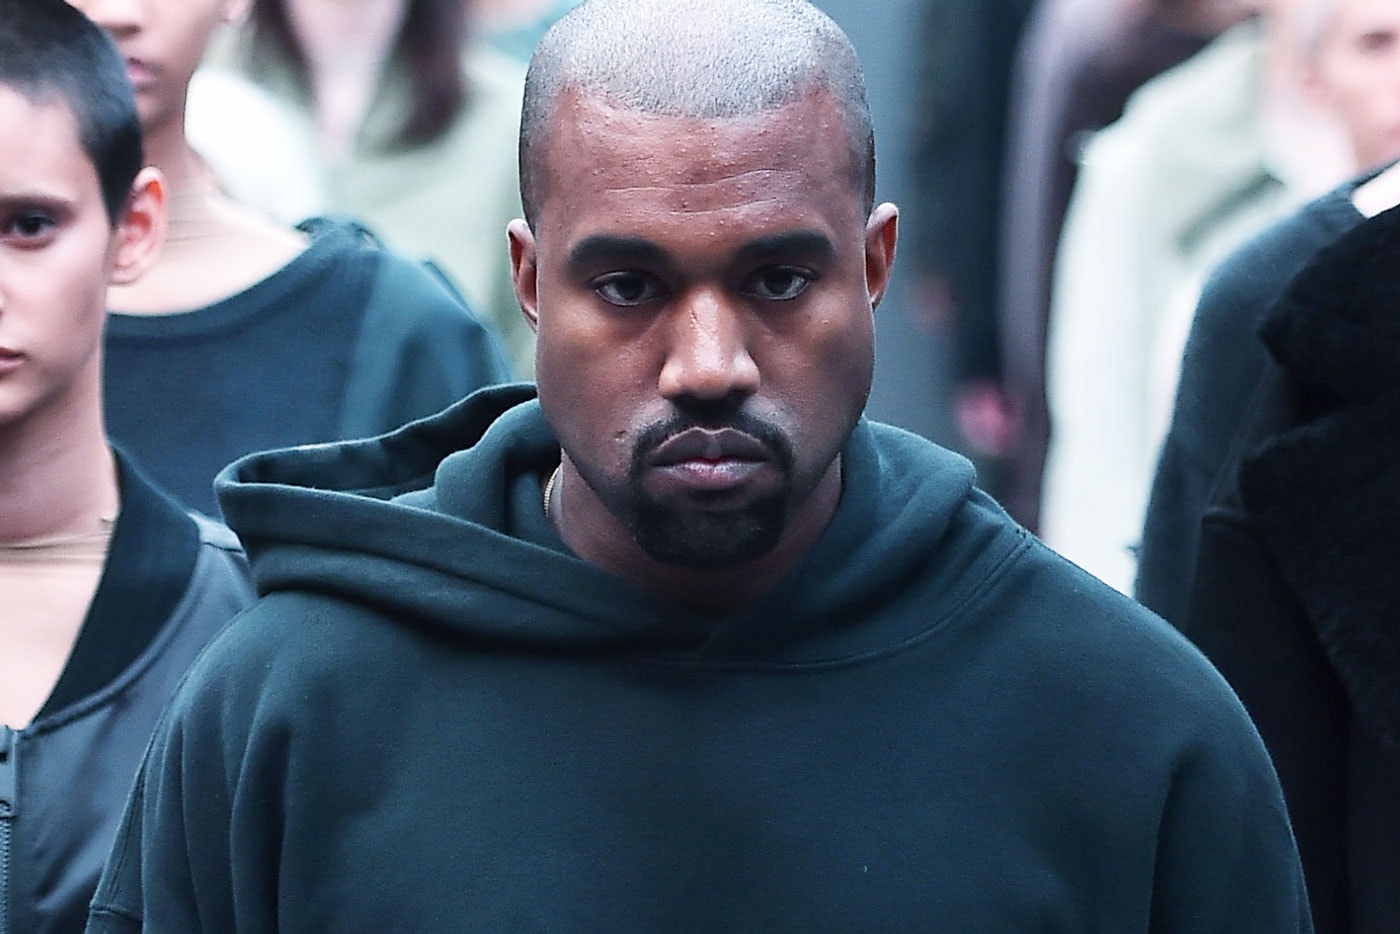 There's a Showroom of Kanye West's Yeezy Season 2 Collection